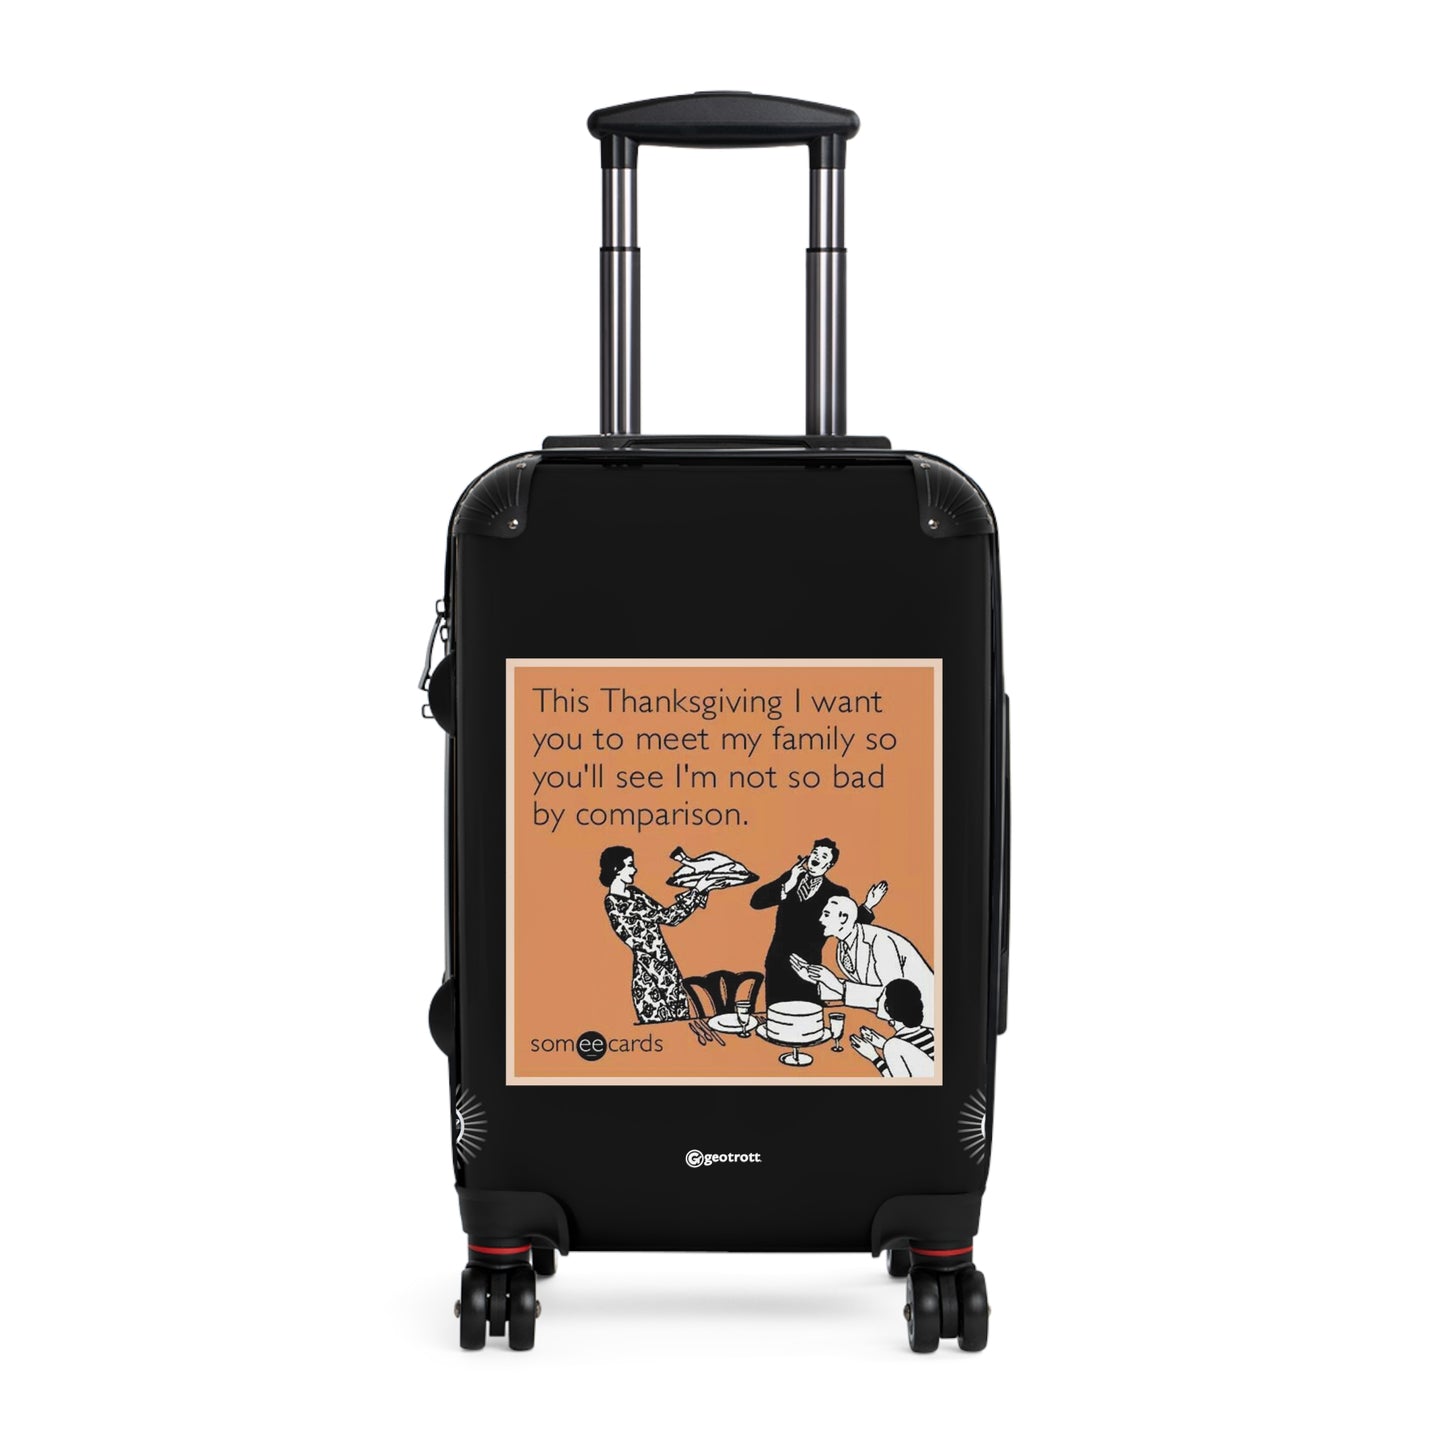 This Thanksgiving I Want You To Meet My Family MEME Funny Inspirational Luggage Bag Rolling Suitcase Travel Accessories